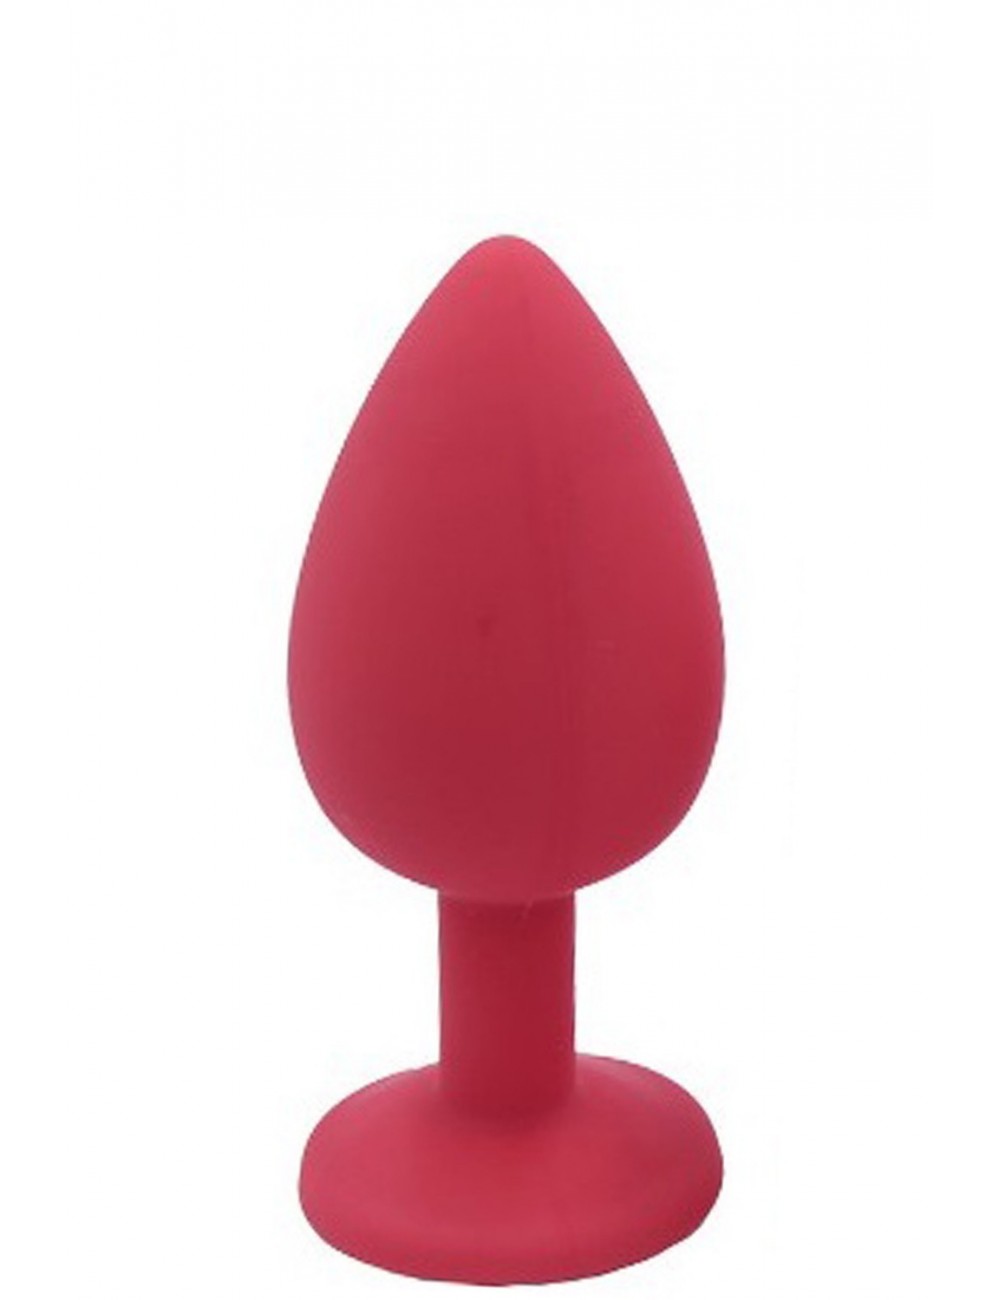 Sextoys - Godes & Plugs - Plug rouge bijou cristal taille small - db-ry067cred - Dreamy Toys